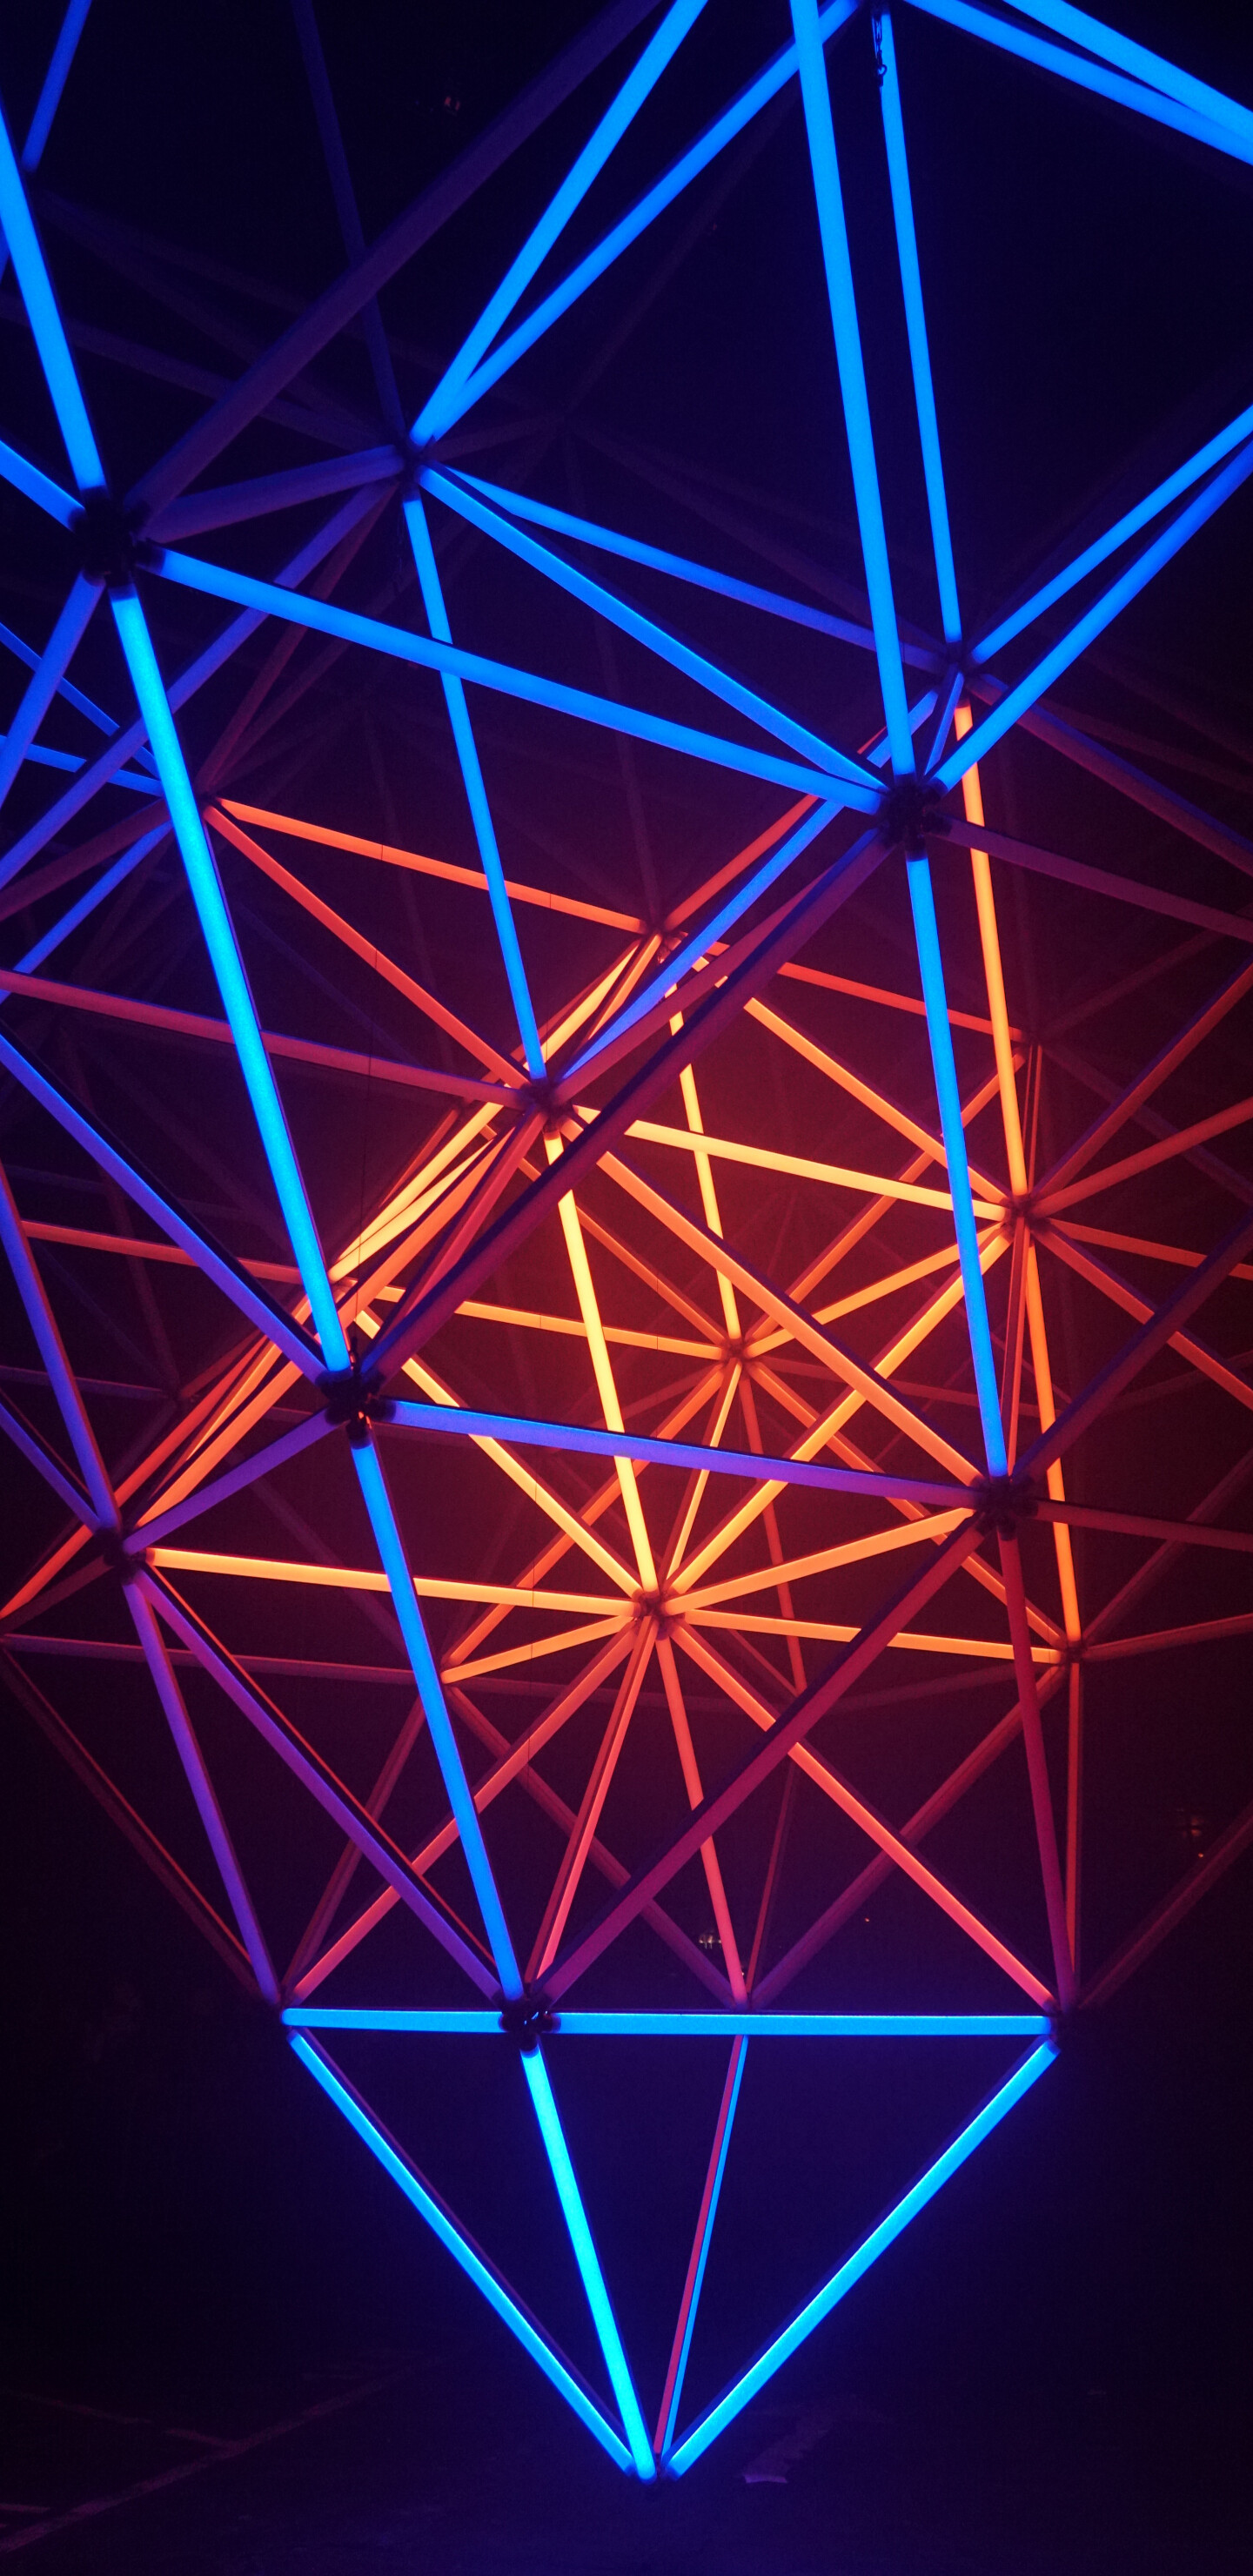 Triangle: Neon shapes, Line structure, Glow, Intersecting lines. 1440x2960 HD Wallpaper.